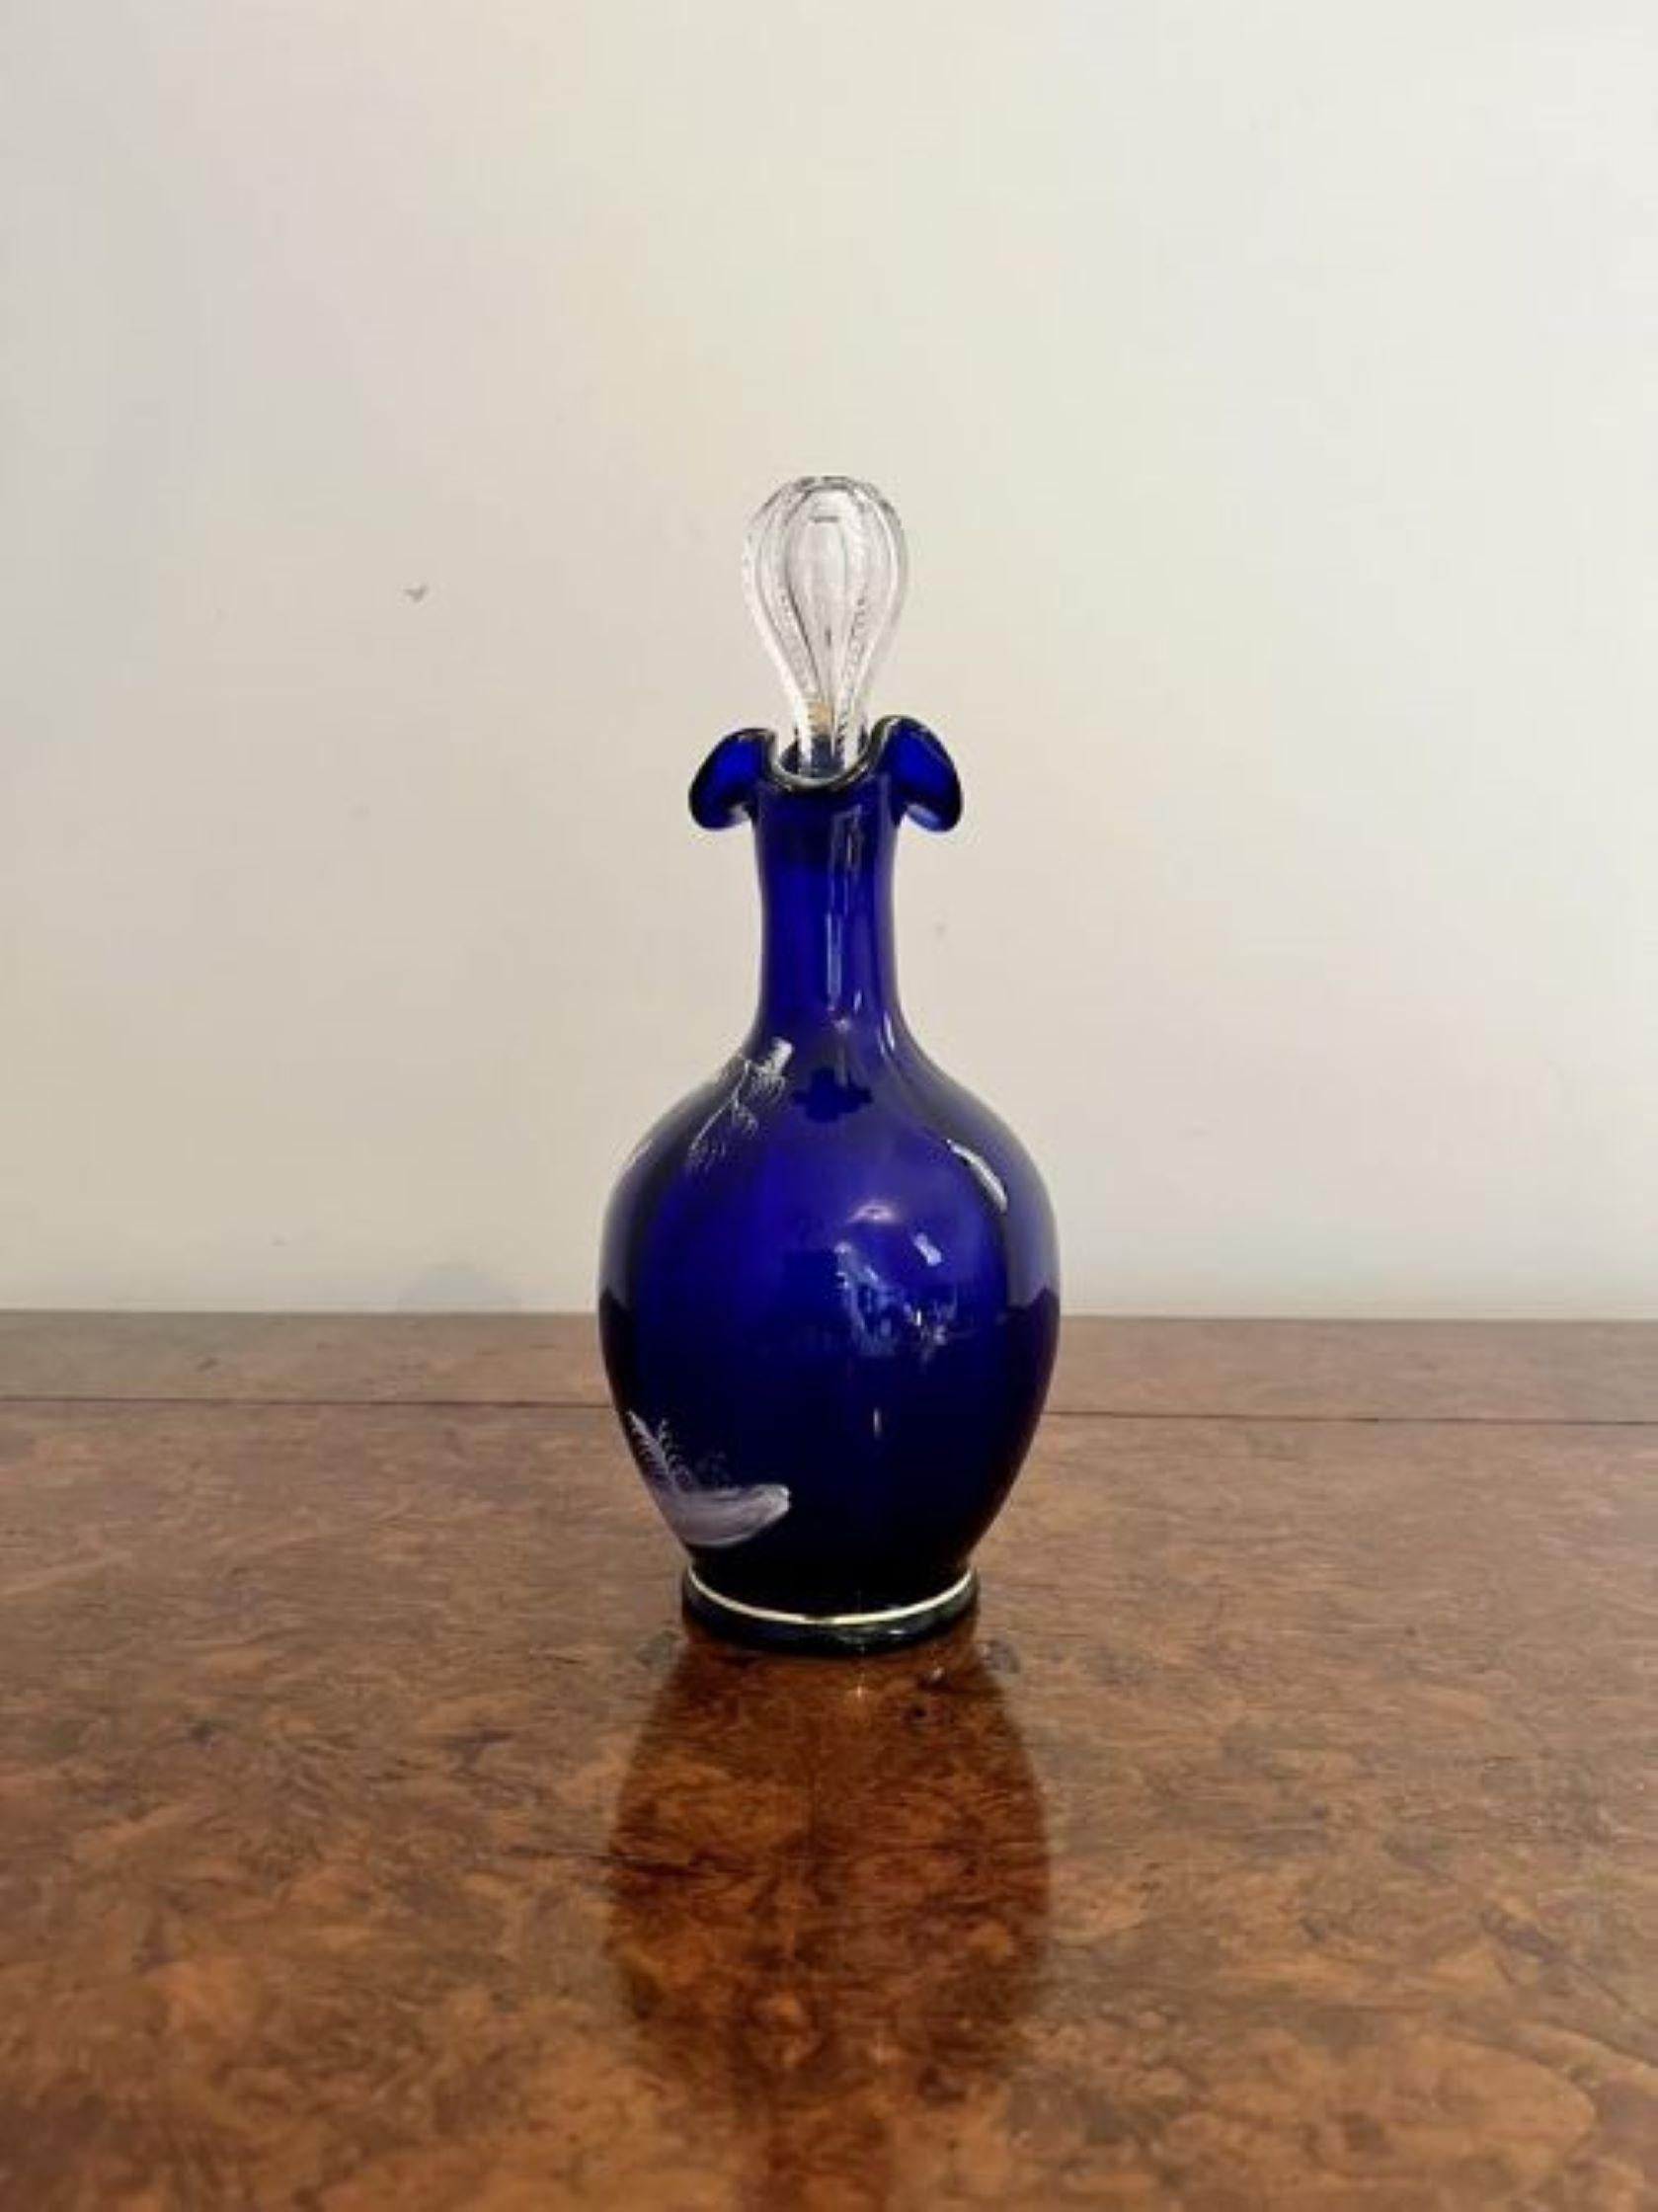 Stunning quality antique Mary Gregory blue glass decanter having a stunning quality Mary Gregory blue glass decanter with white enamel decoration and gold gilding with a shaped handle to the back and a wavy top with the original glass stopper.